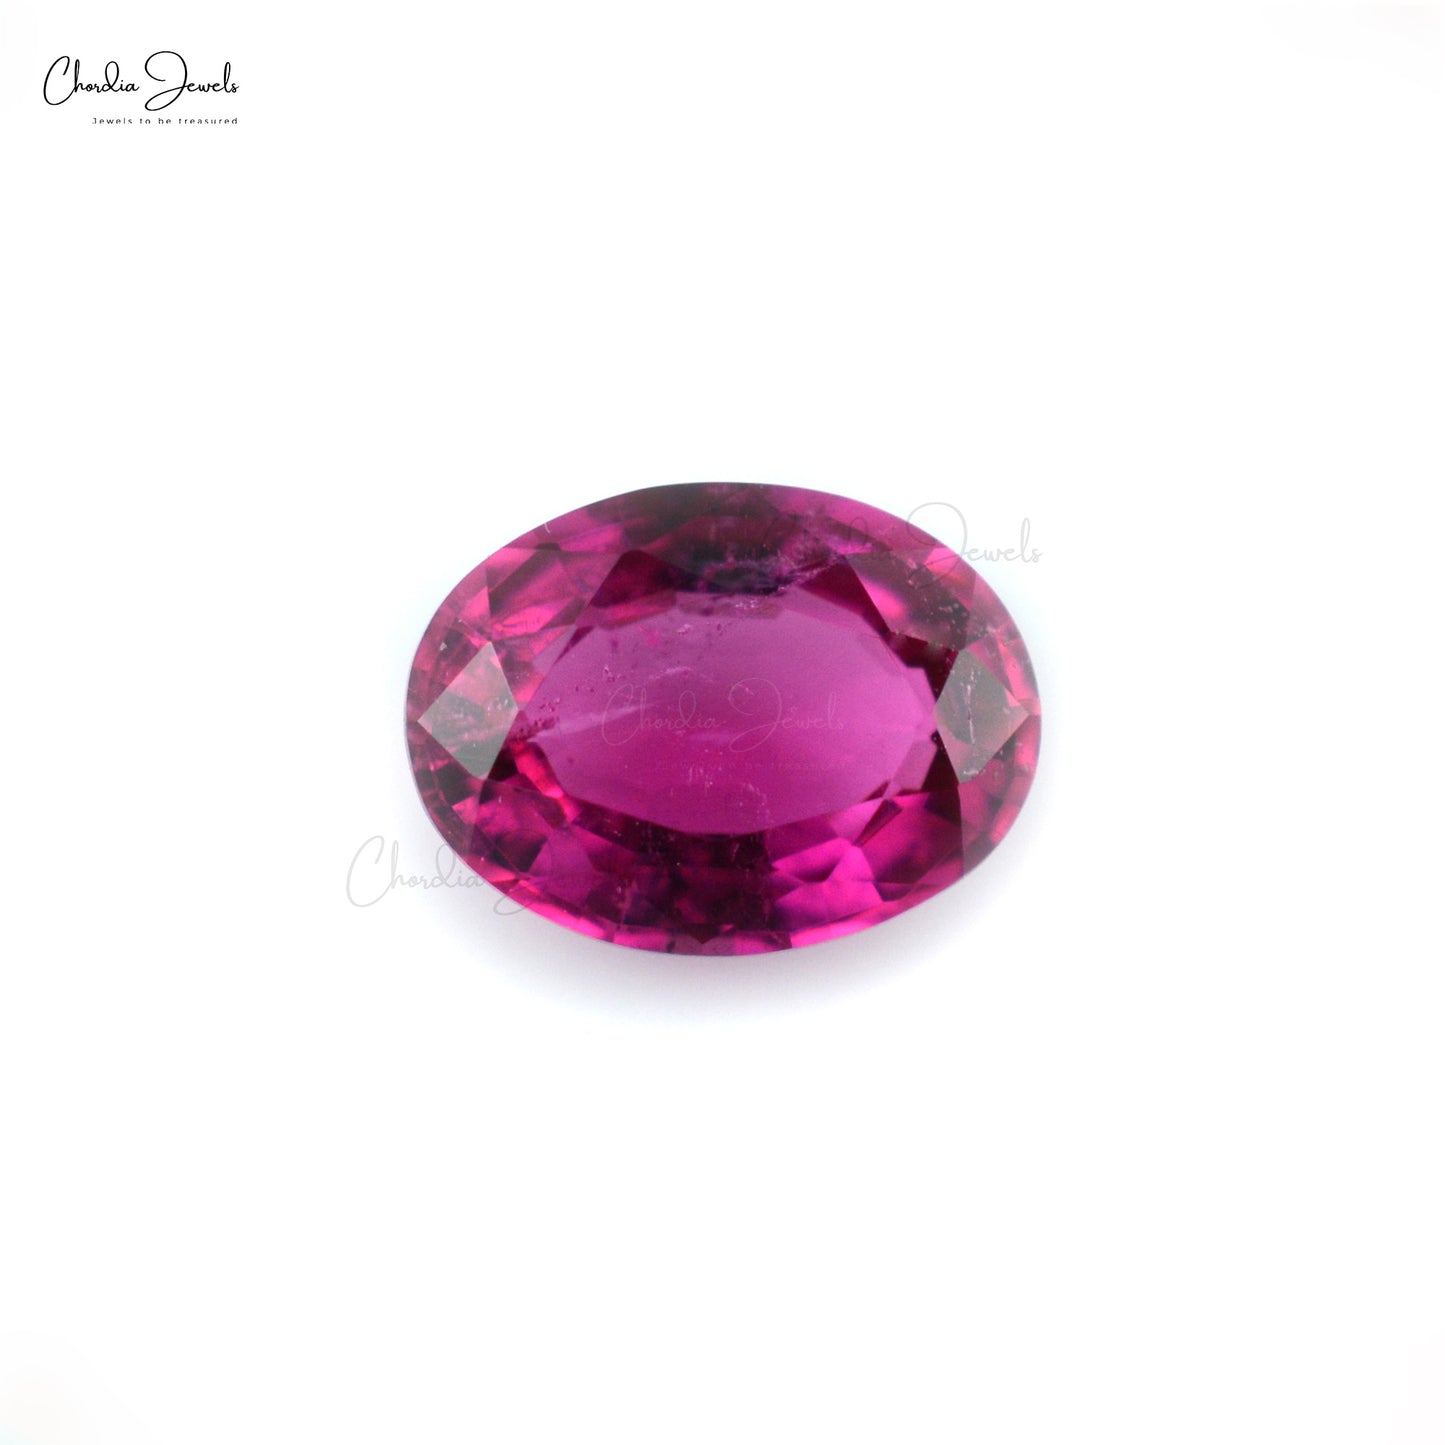 Oval Faceted AAA Rubellite Tourmaline 0.10 Carat Top Grade Gemstone for Earrings, 1 Piece